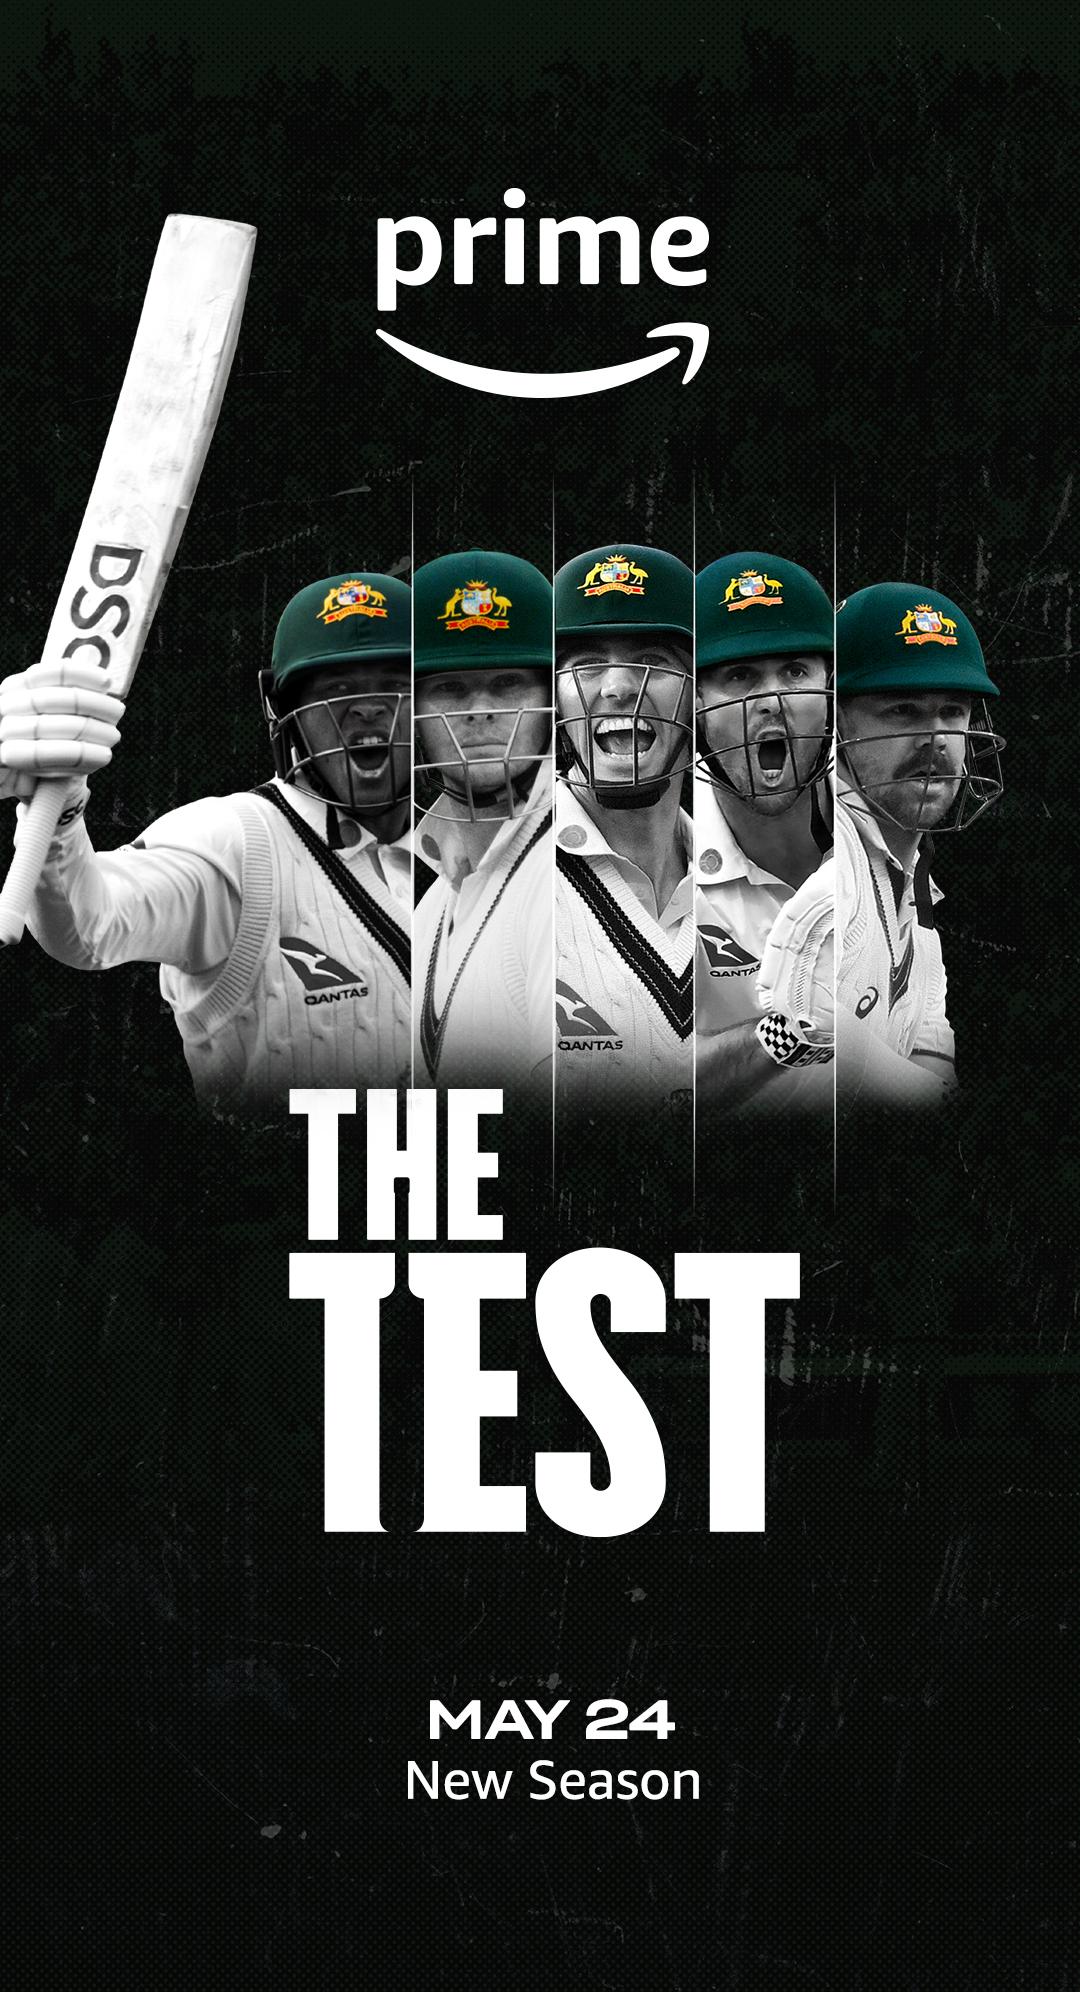 The Test Season 3 (Prime Video) – May 23The Test is back for a third season, offering an inside look at the Australian men’s cricket team post-coach Justin Langer’s departure. The series focuses on the team’s adaptation to new leadership under Andrew McDonald and the dynamics within the squad. With a mix of new players and seasoned veterans, this season captures their preparation, challenges, and on-field battles as they strive to uphold their legacy in the cricketing world.